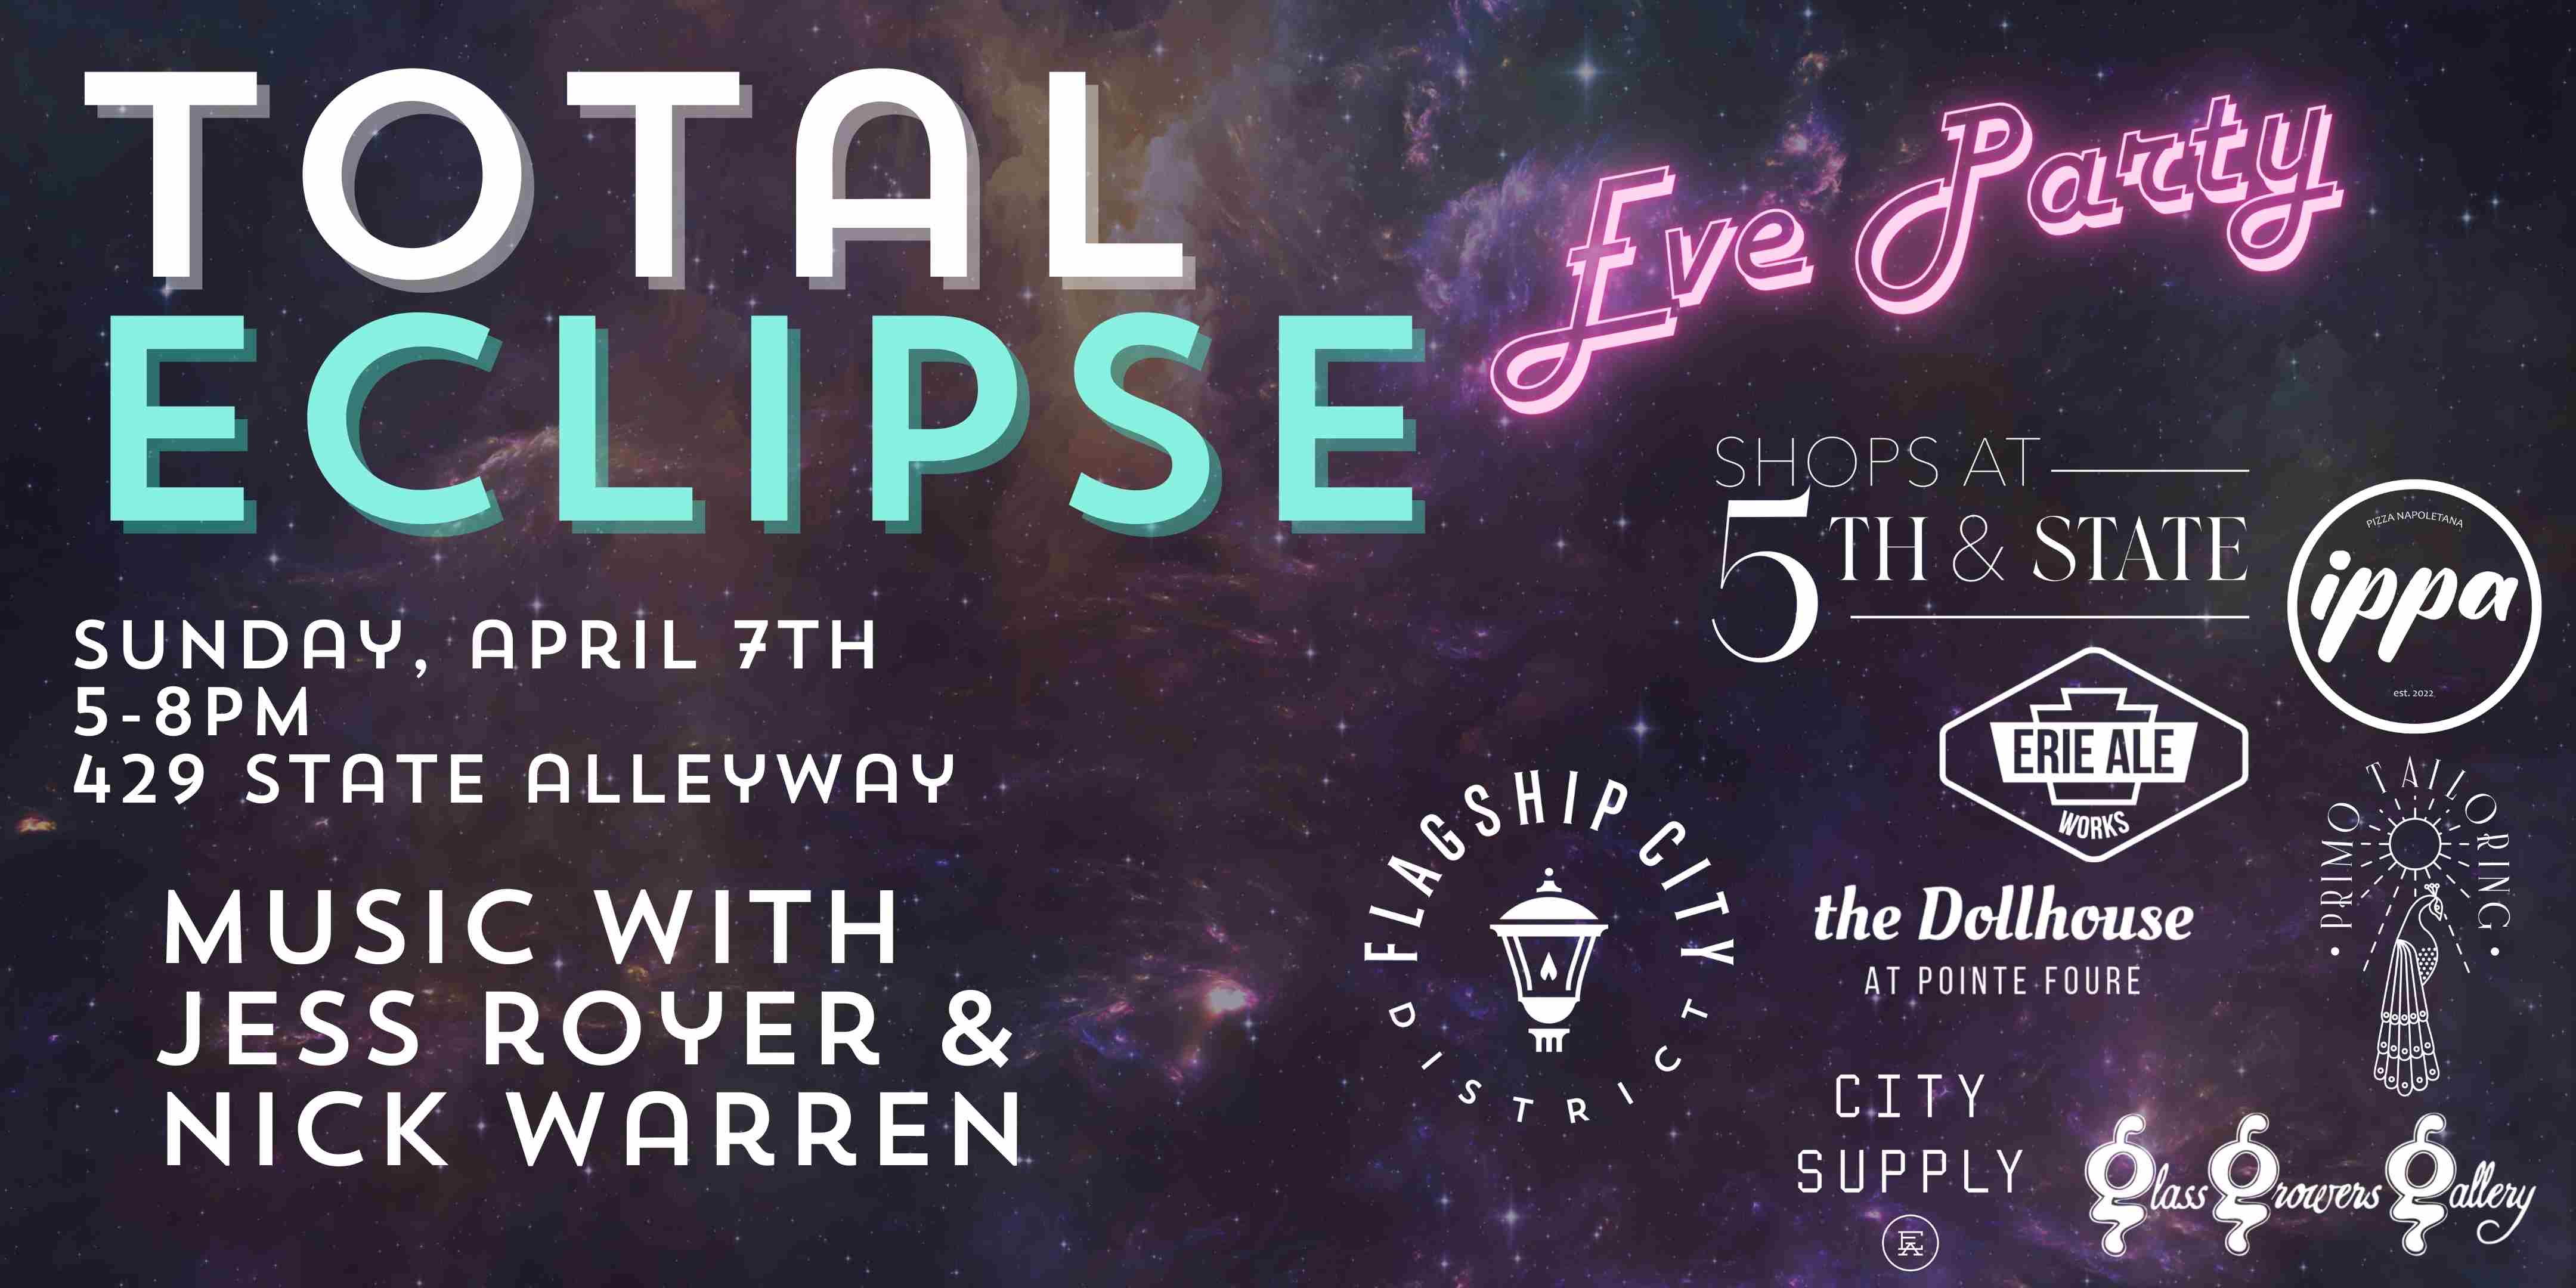 TOTAL ECLIPSE EVE PARTY